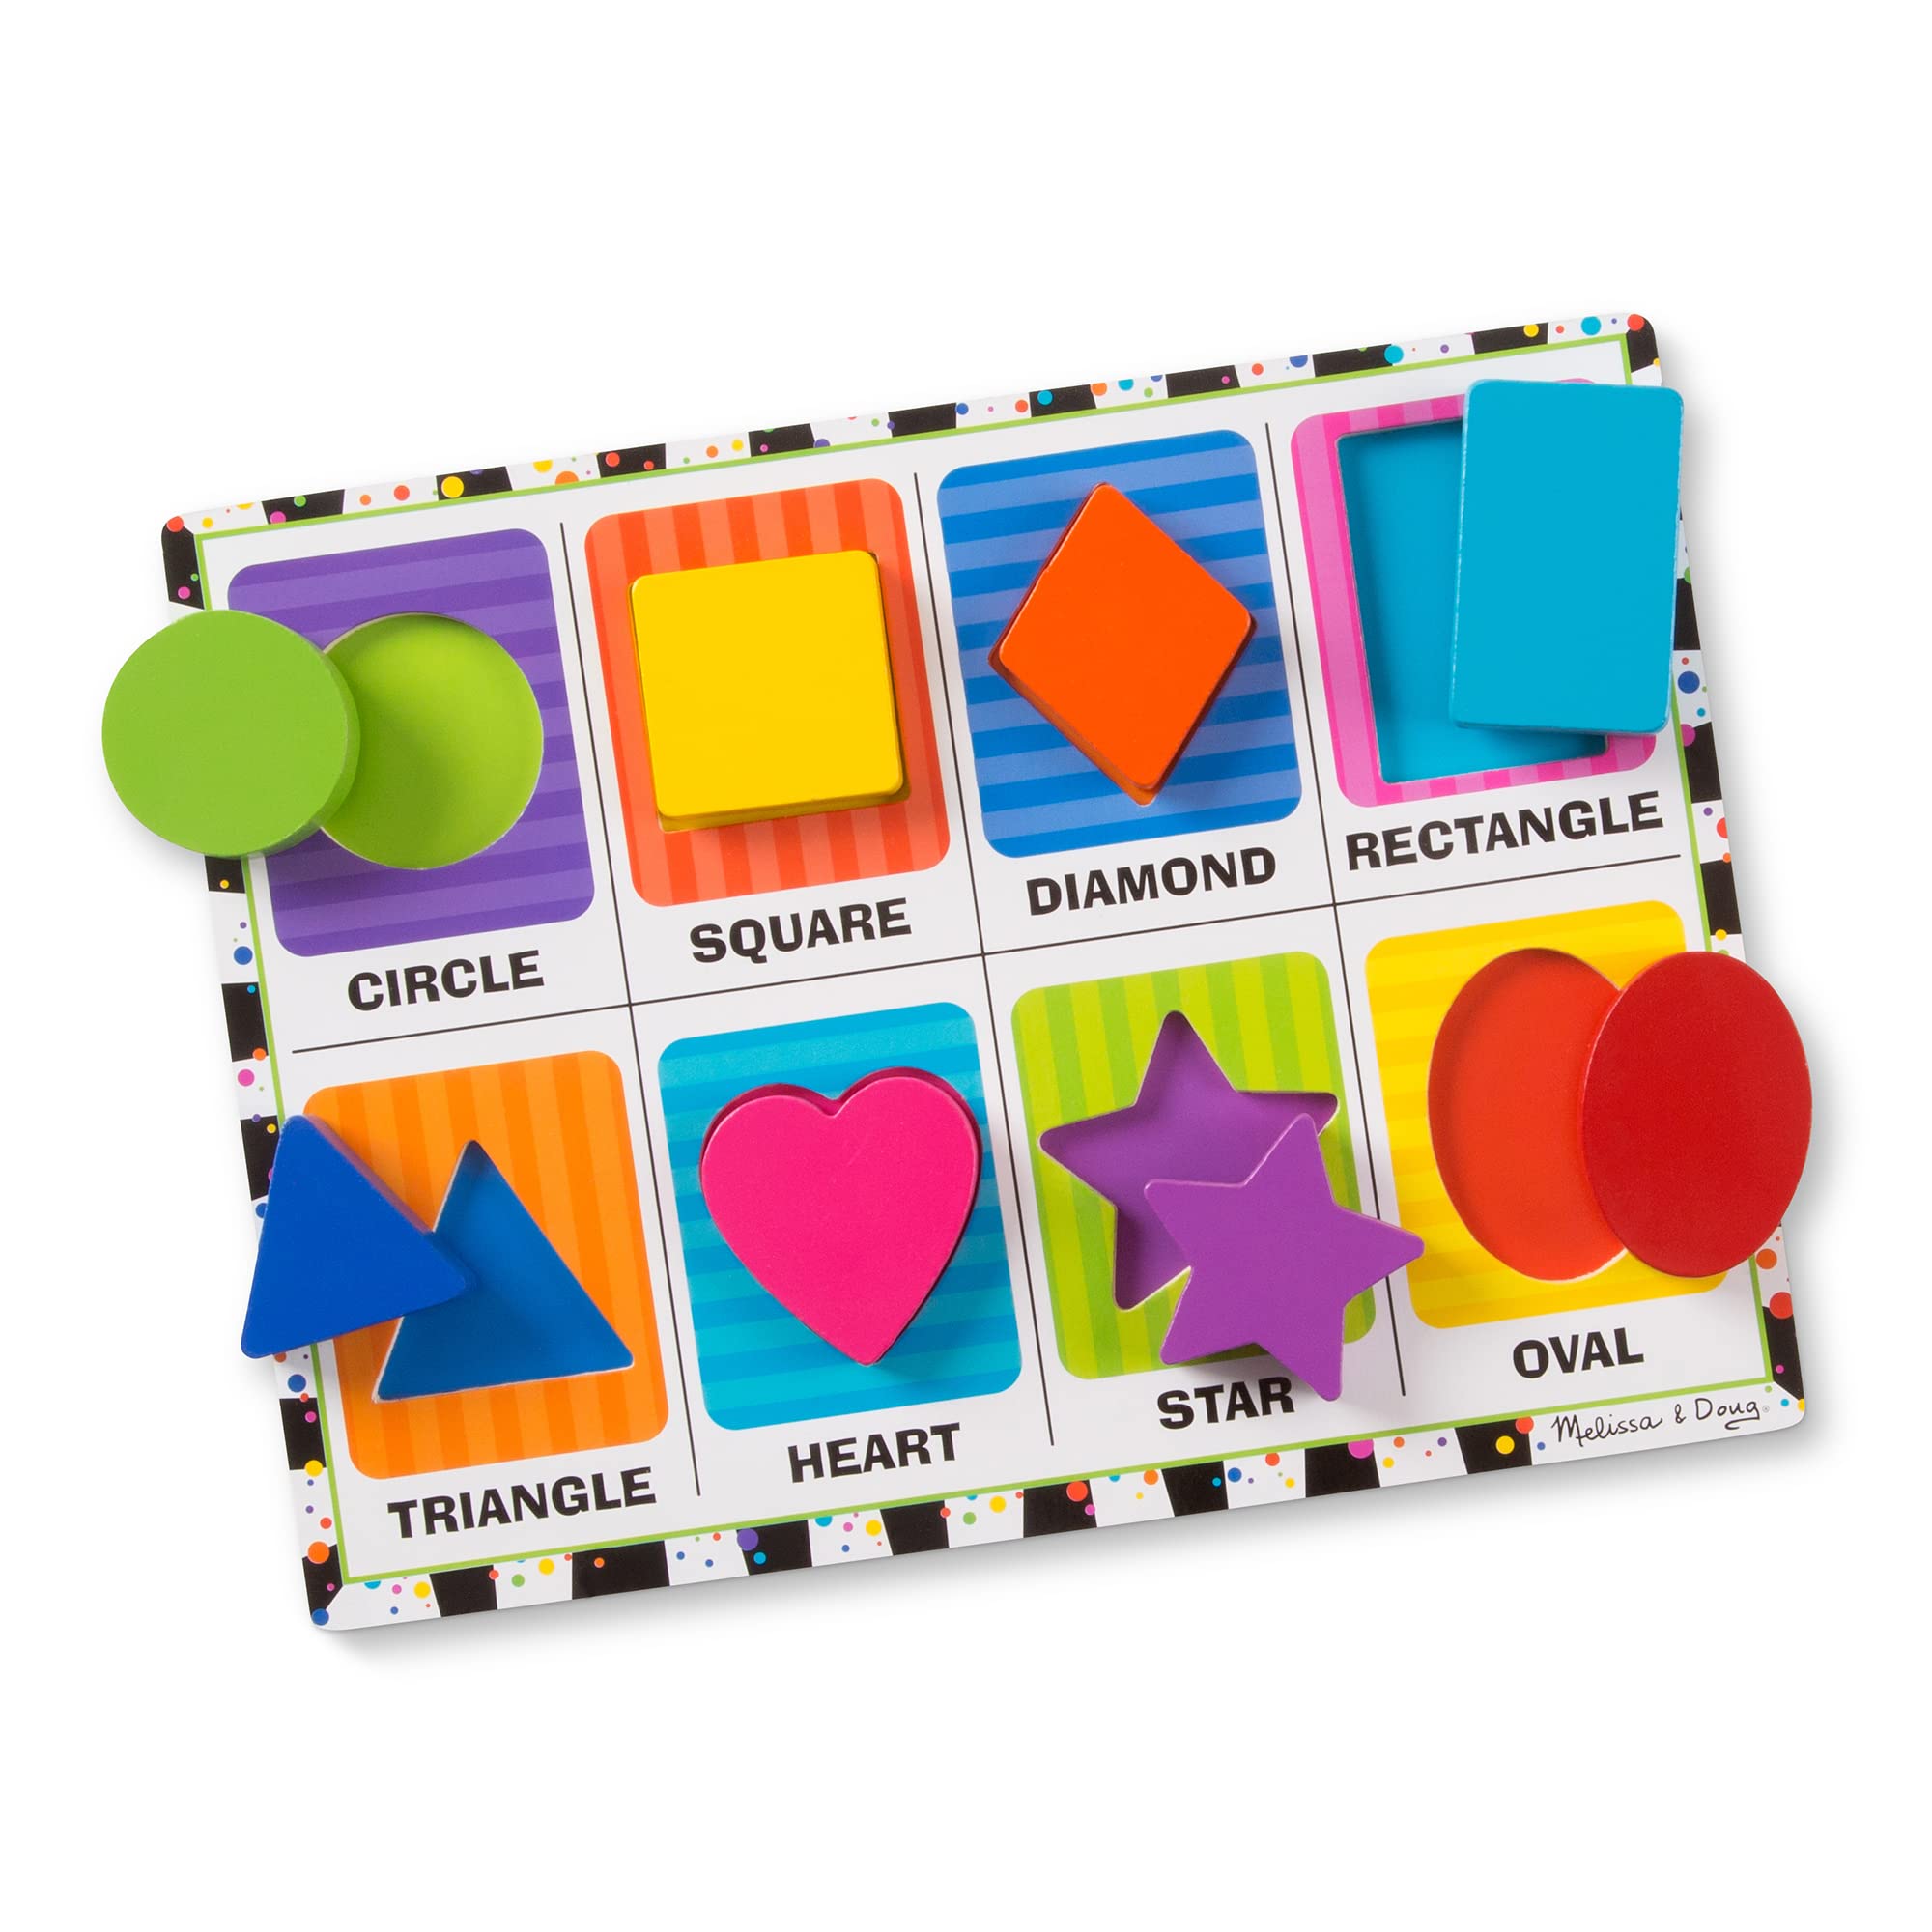 Melissa & Doug Shapes Wooden Chunky Puzzle (8 pcs) - Wooden Puzzles for Toddlers, Animal Puzzles For Kids Ages 2+ - FSC-Certified Materials